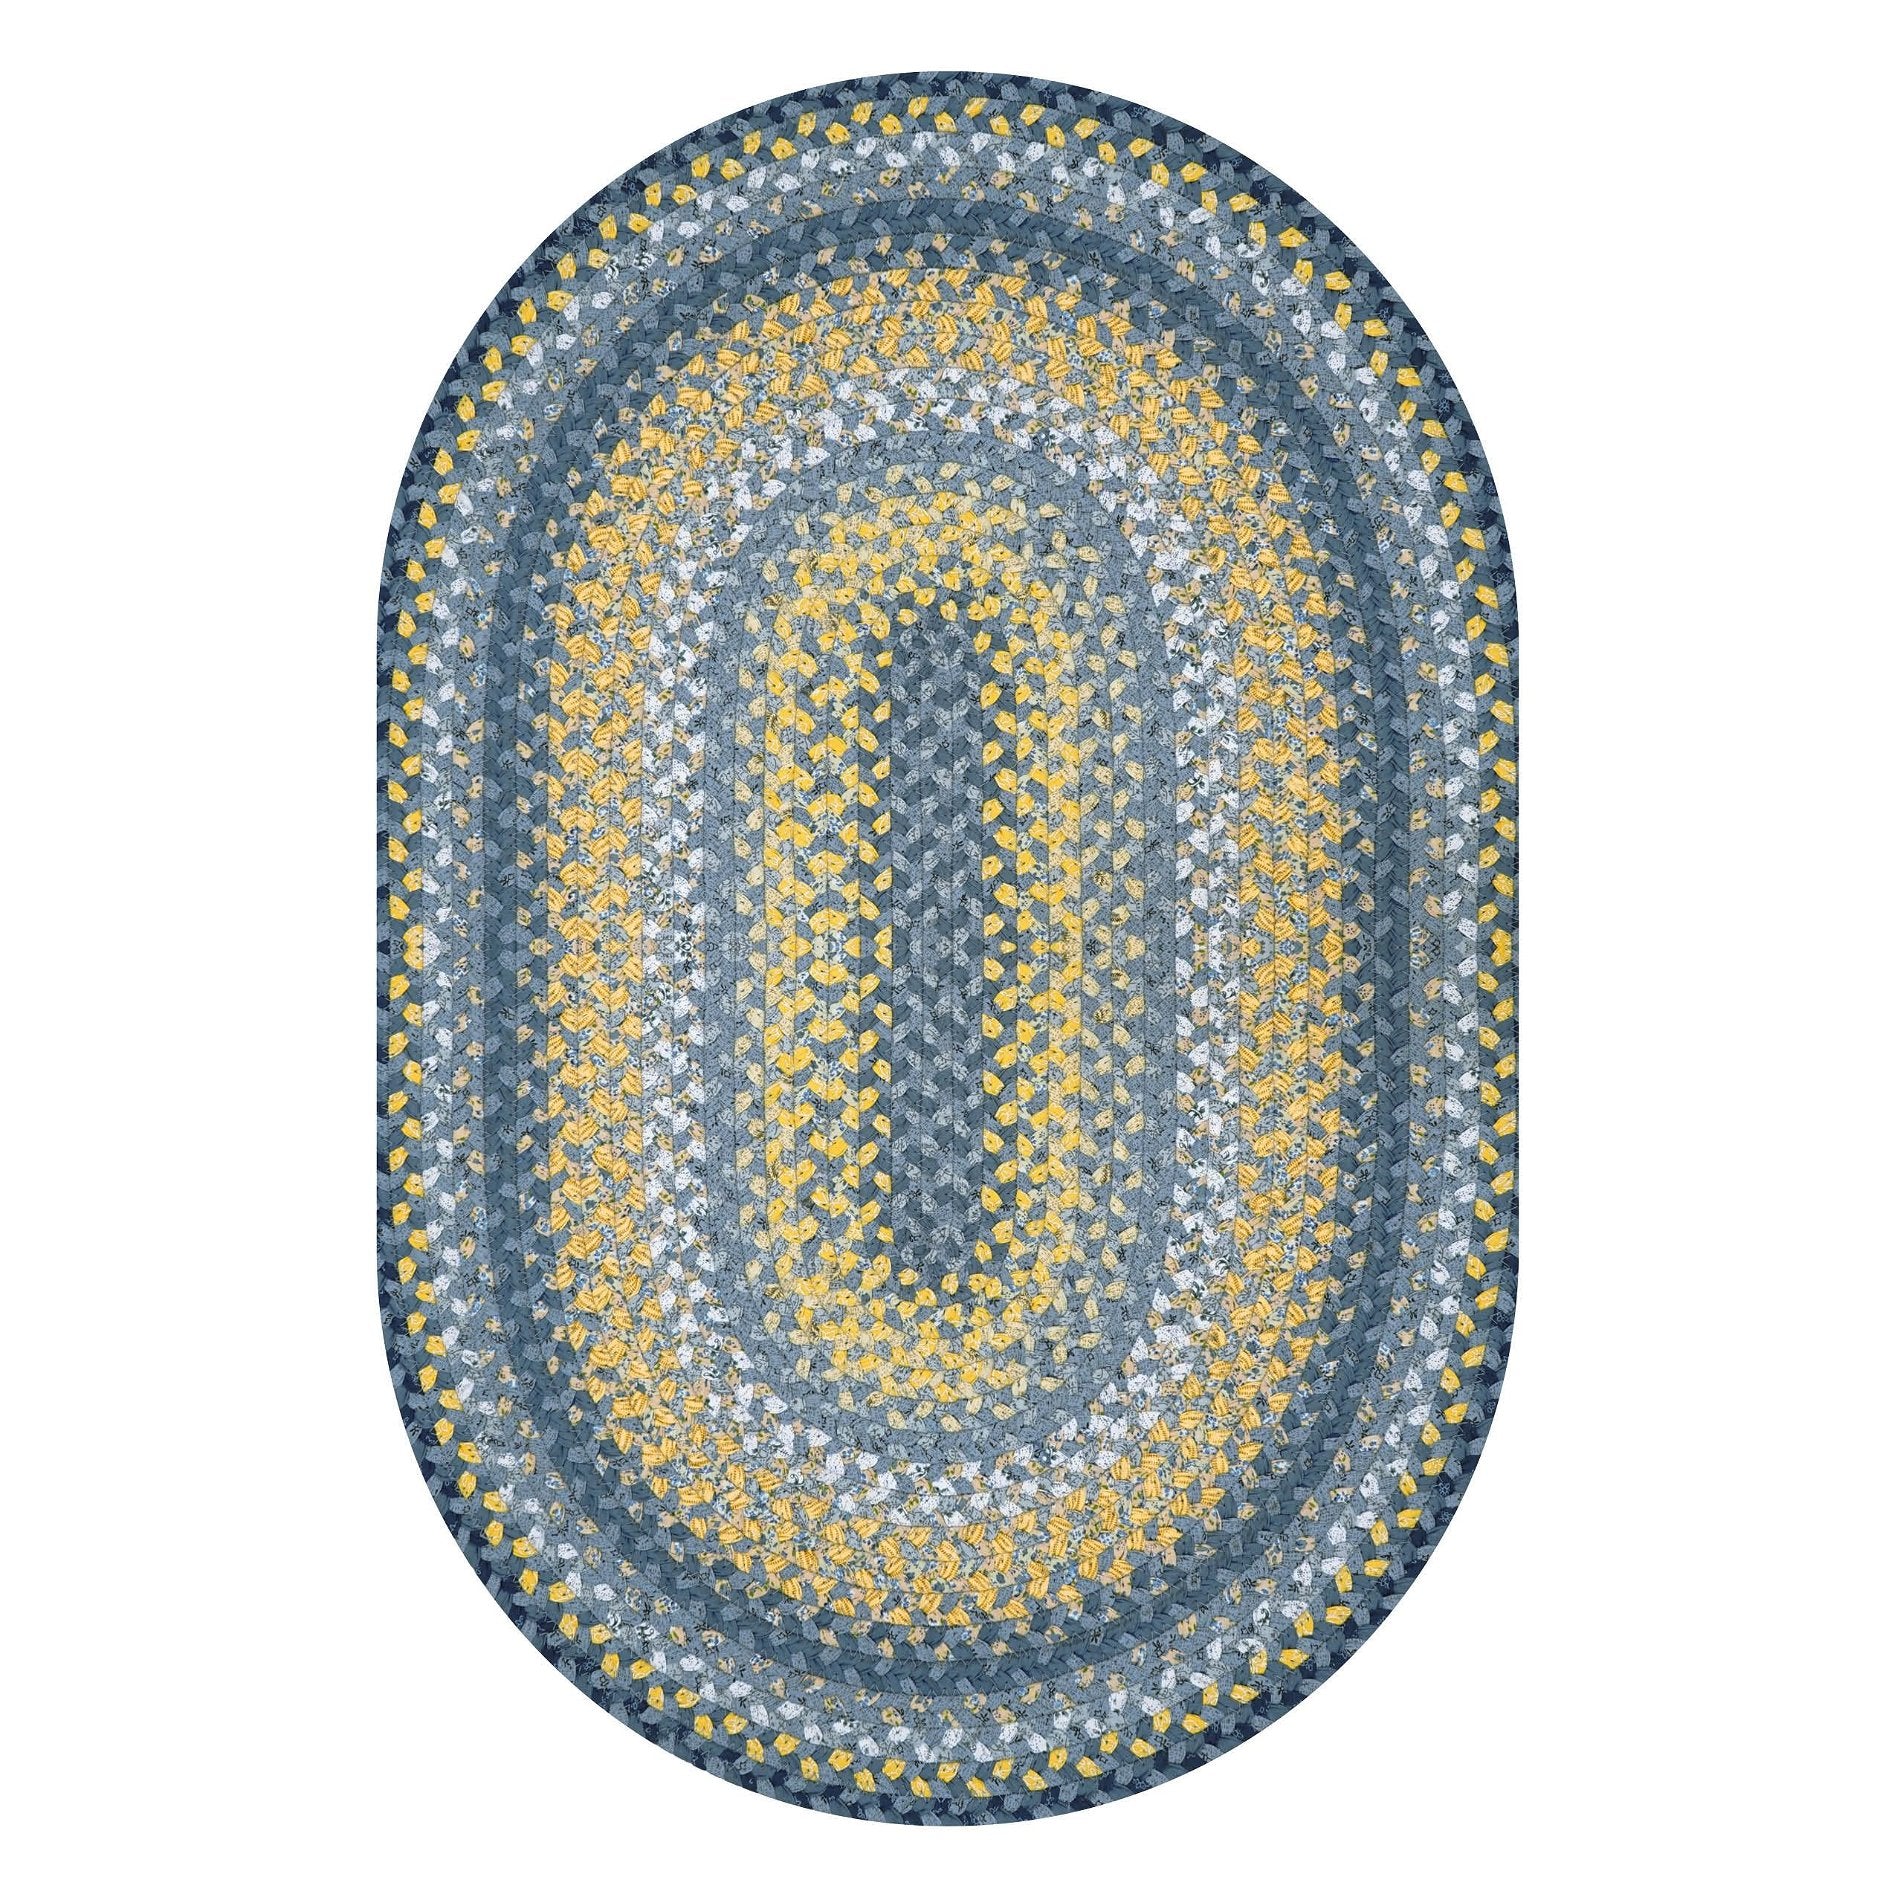 Sunflowers Blue - Gold Cotton Braided Oval Rugs - Braided-Rugs.com